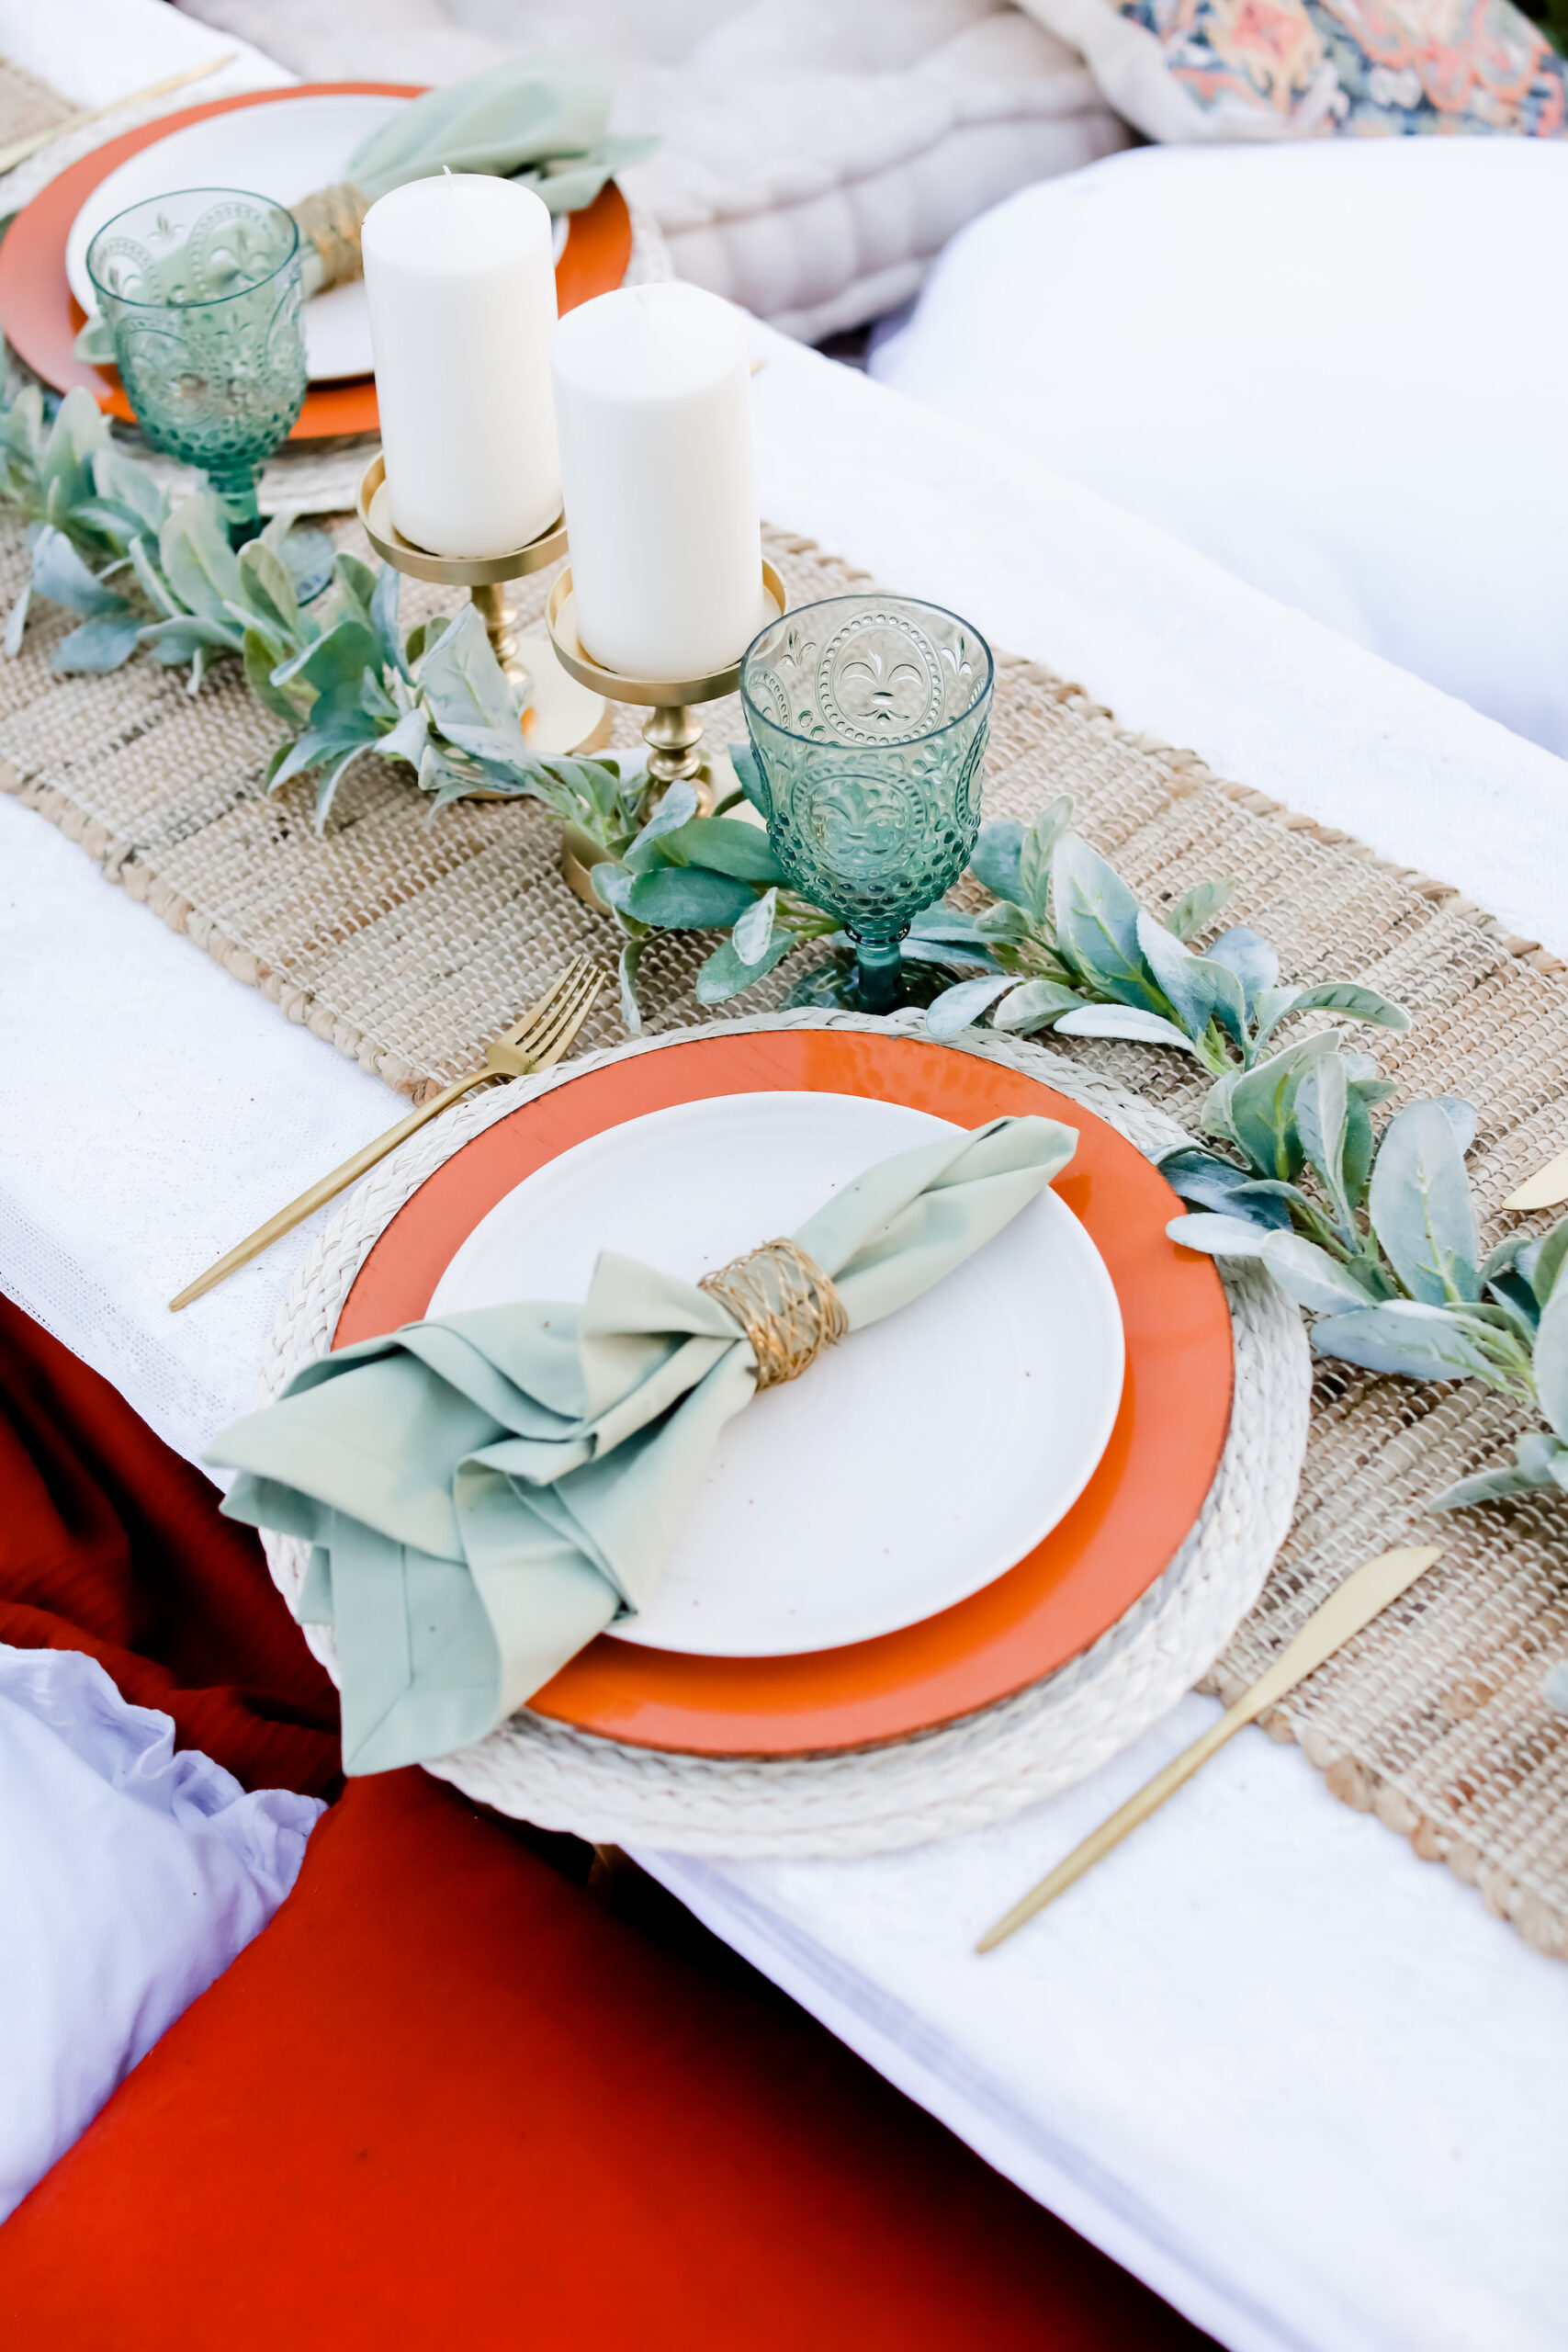 Terracotta Charger with Greenery Garland Centerpiece, Vintage Glassware, Mint Napkins, and Jute Runner Fall Boho Reception Decor Ideas